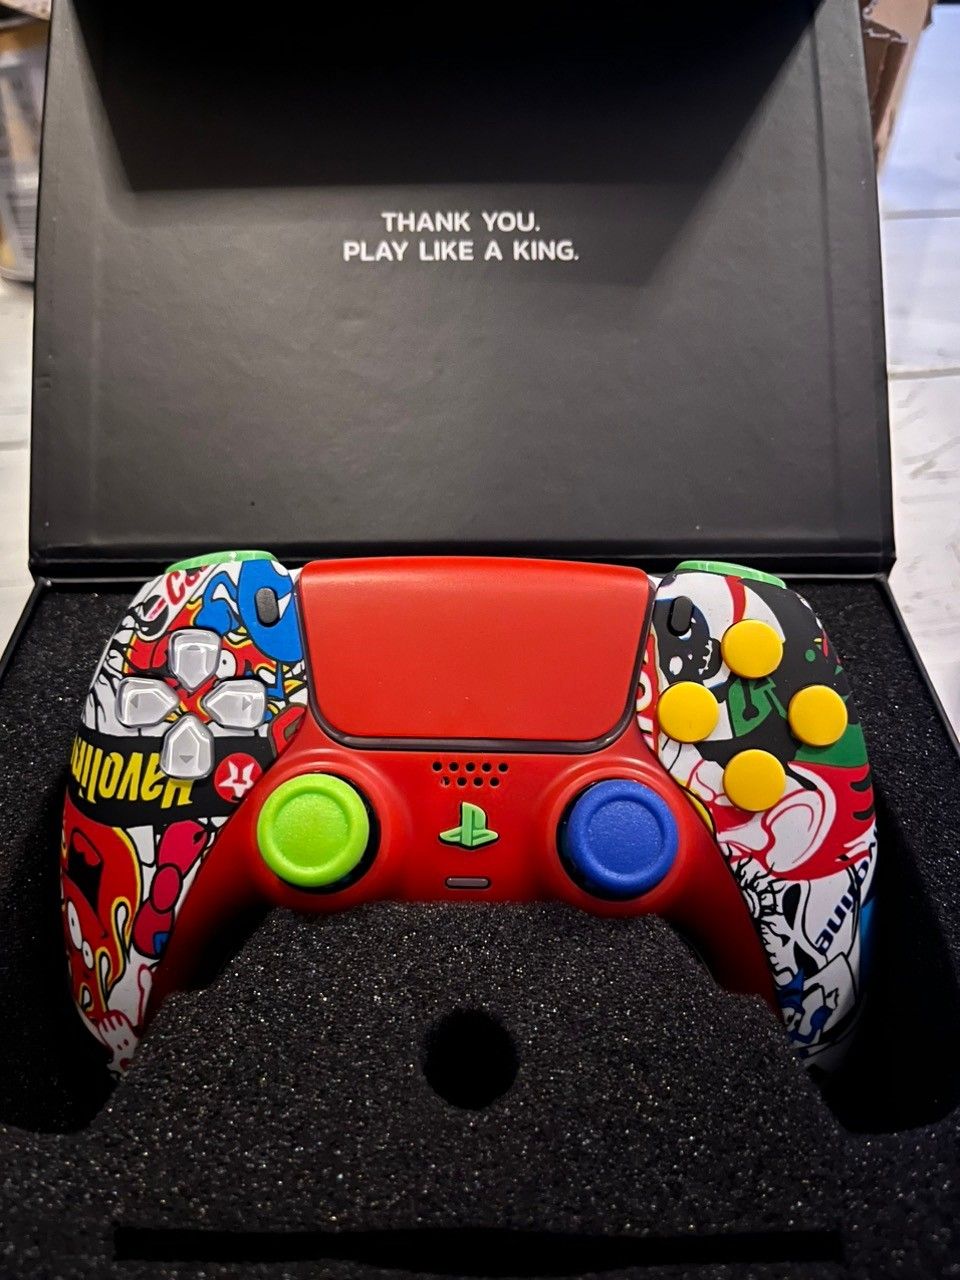 King Pro Controller